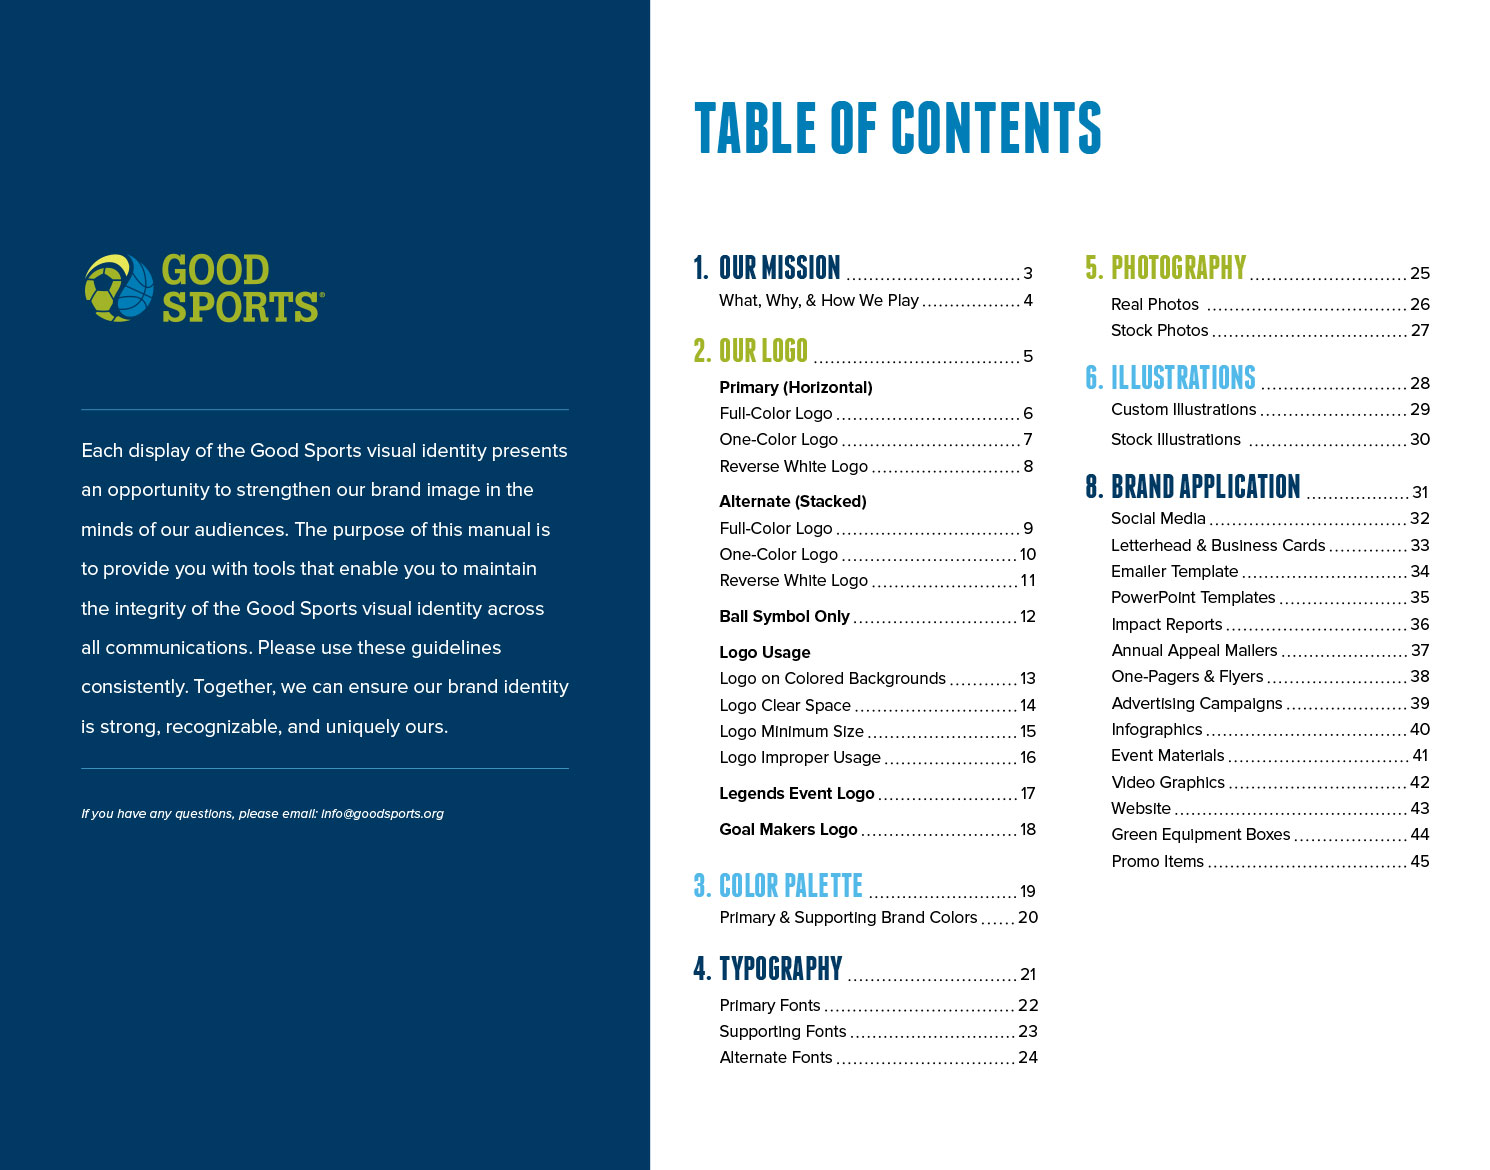 Good Sports Brand Guide showing table of contents